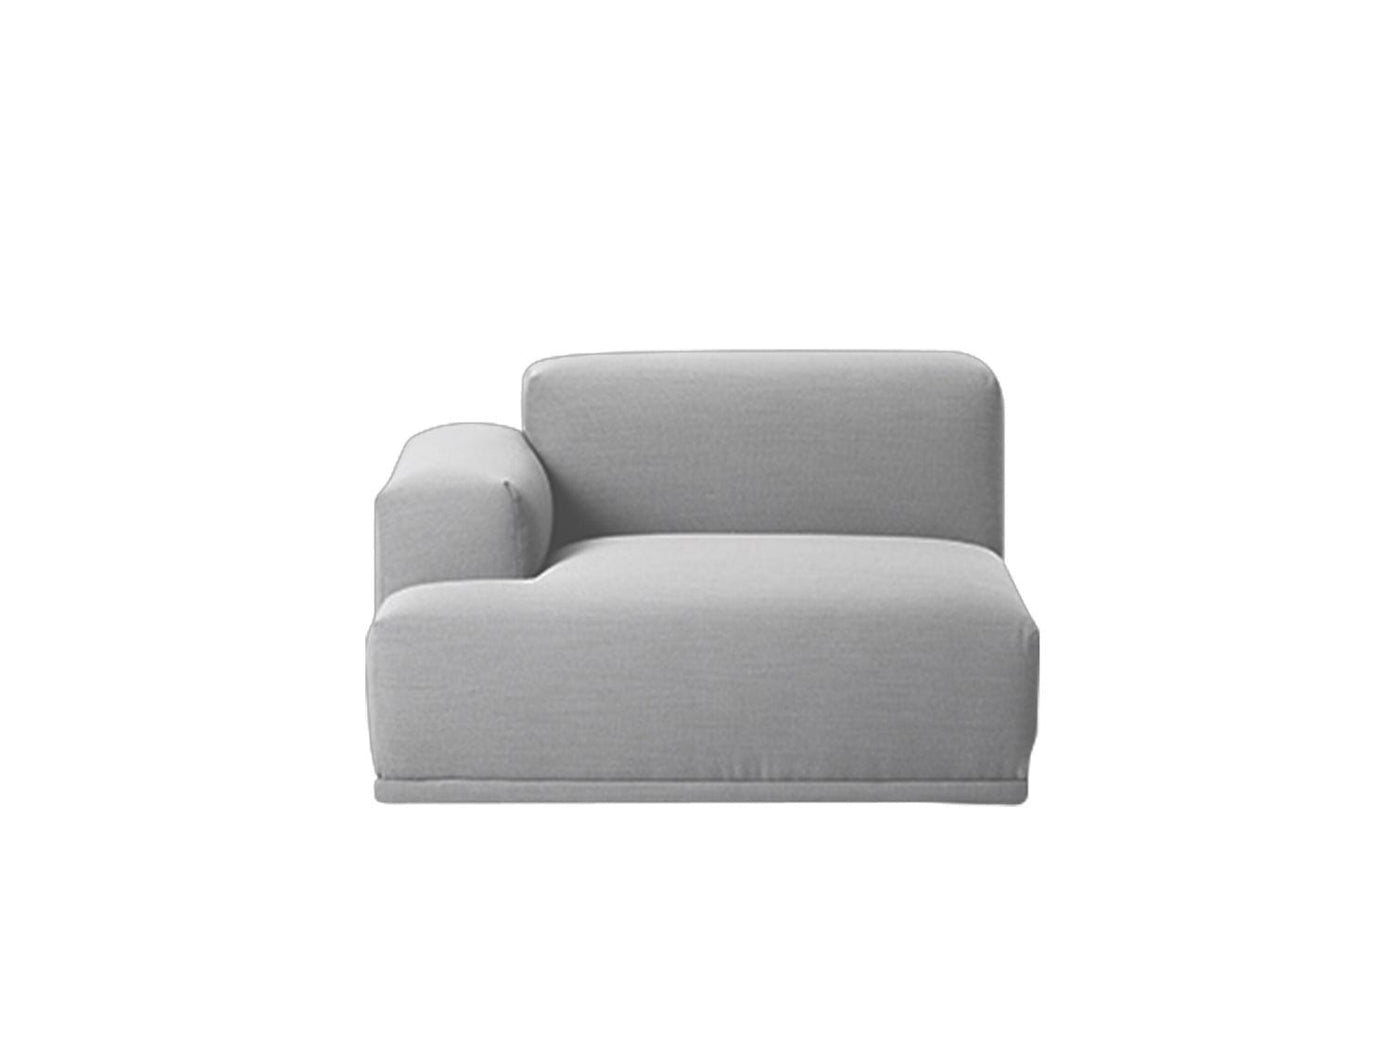 Muuto Connect Modular Sofa System, module a, left armrest. Available from someday designs